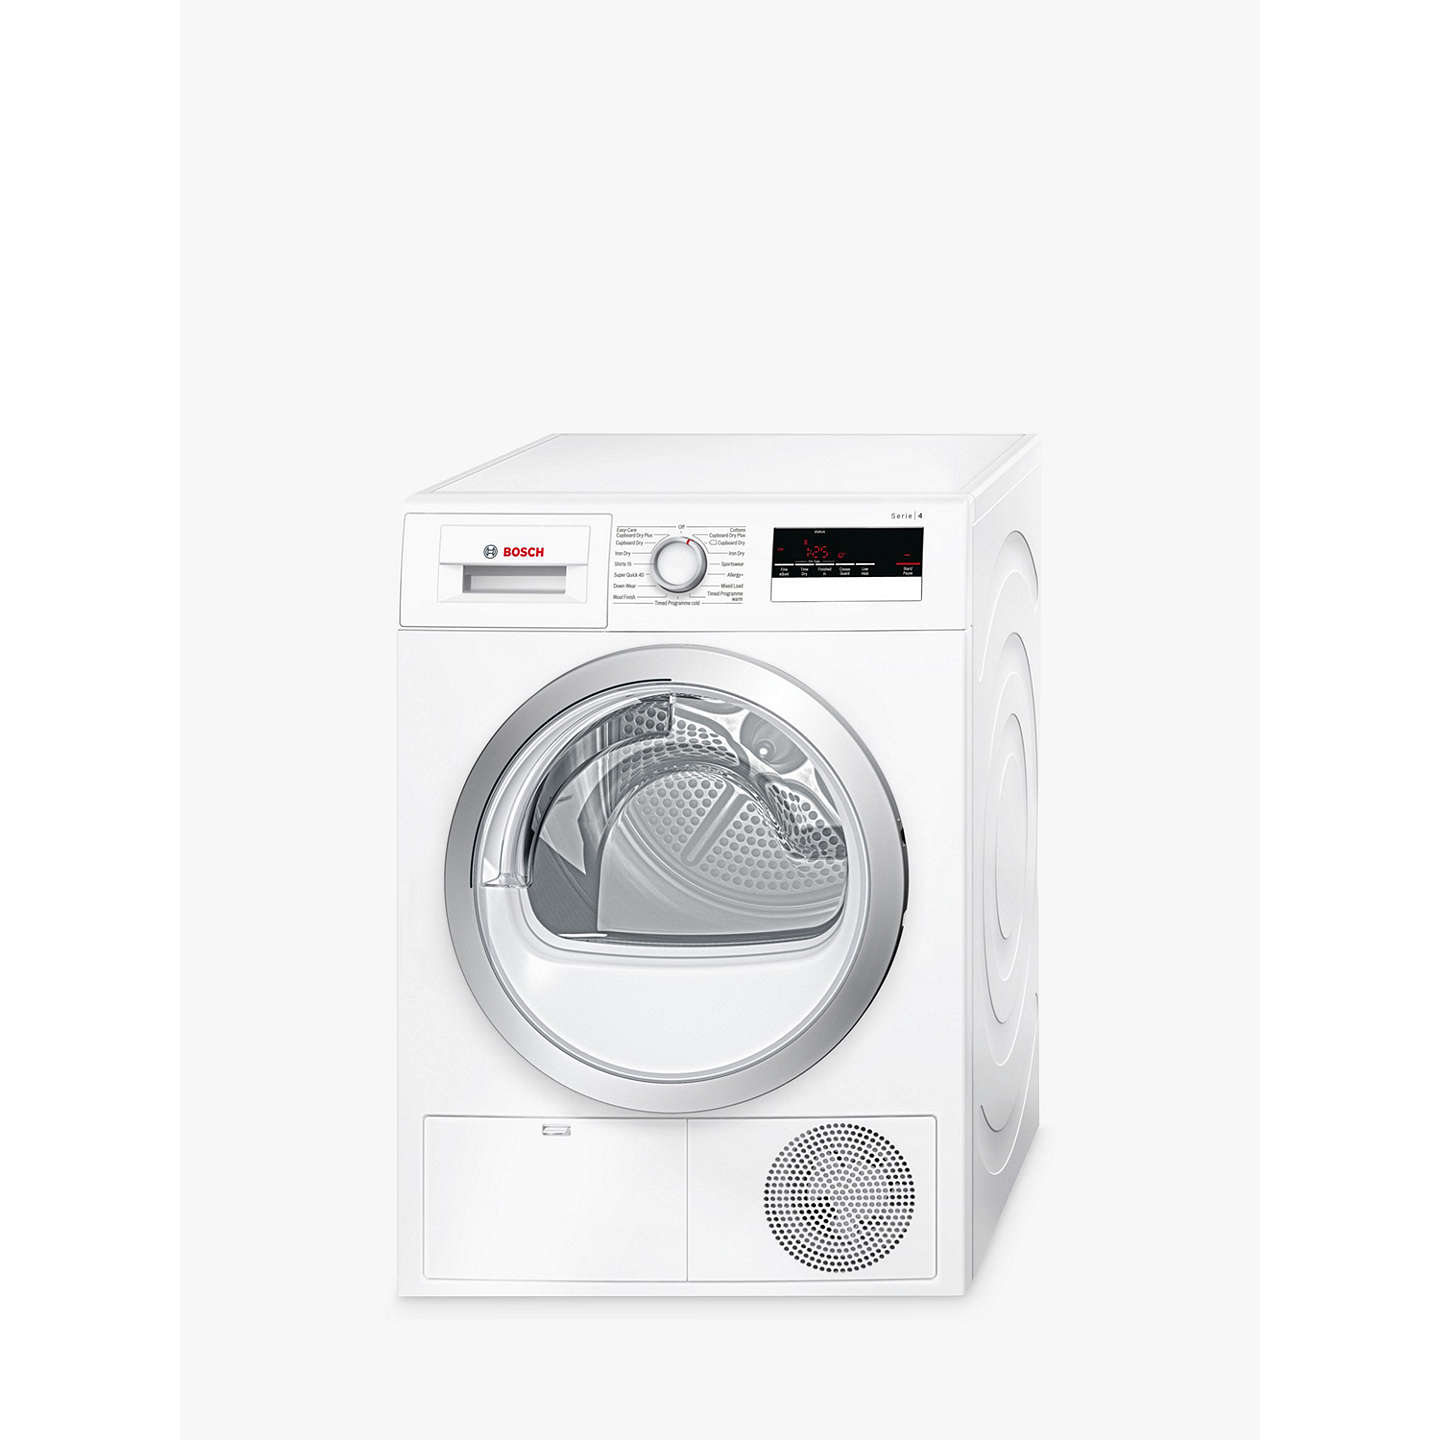 Washer Dryer 15 Minutes A Day To Grow Your Business